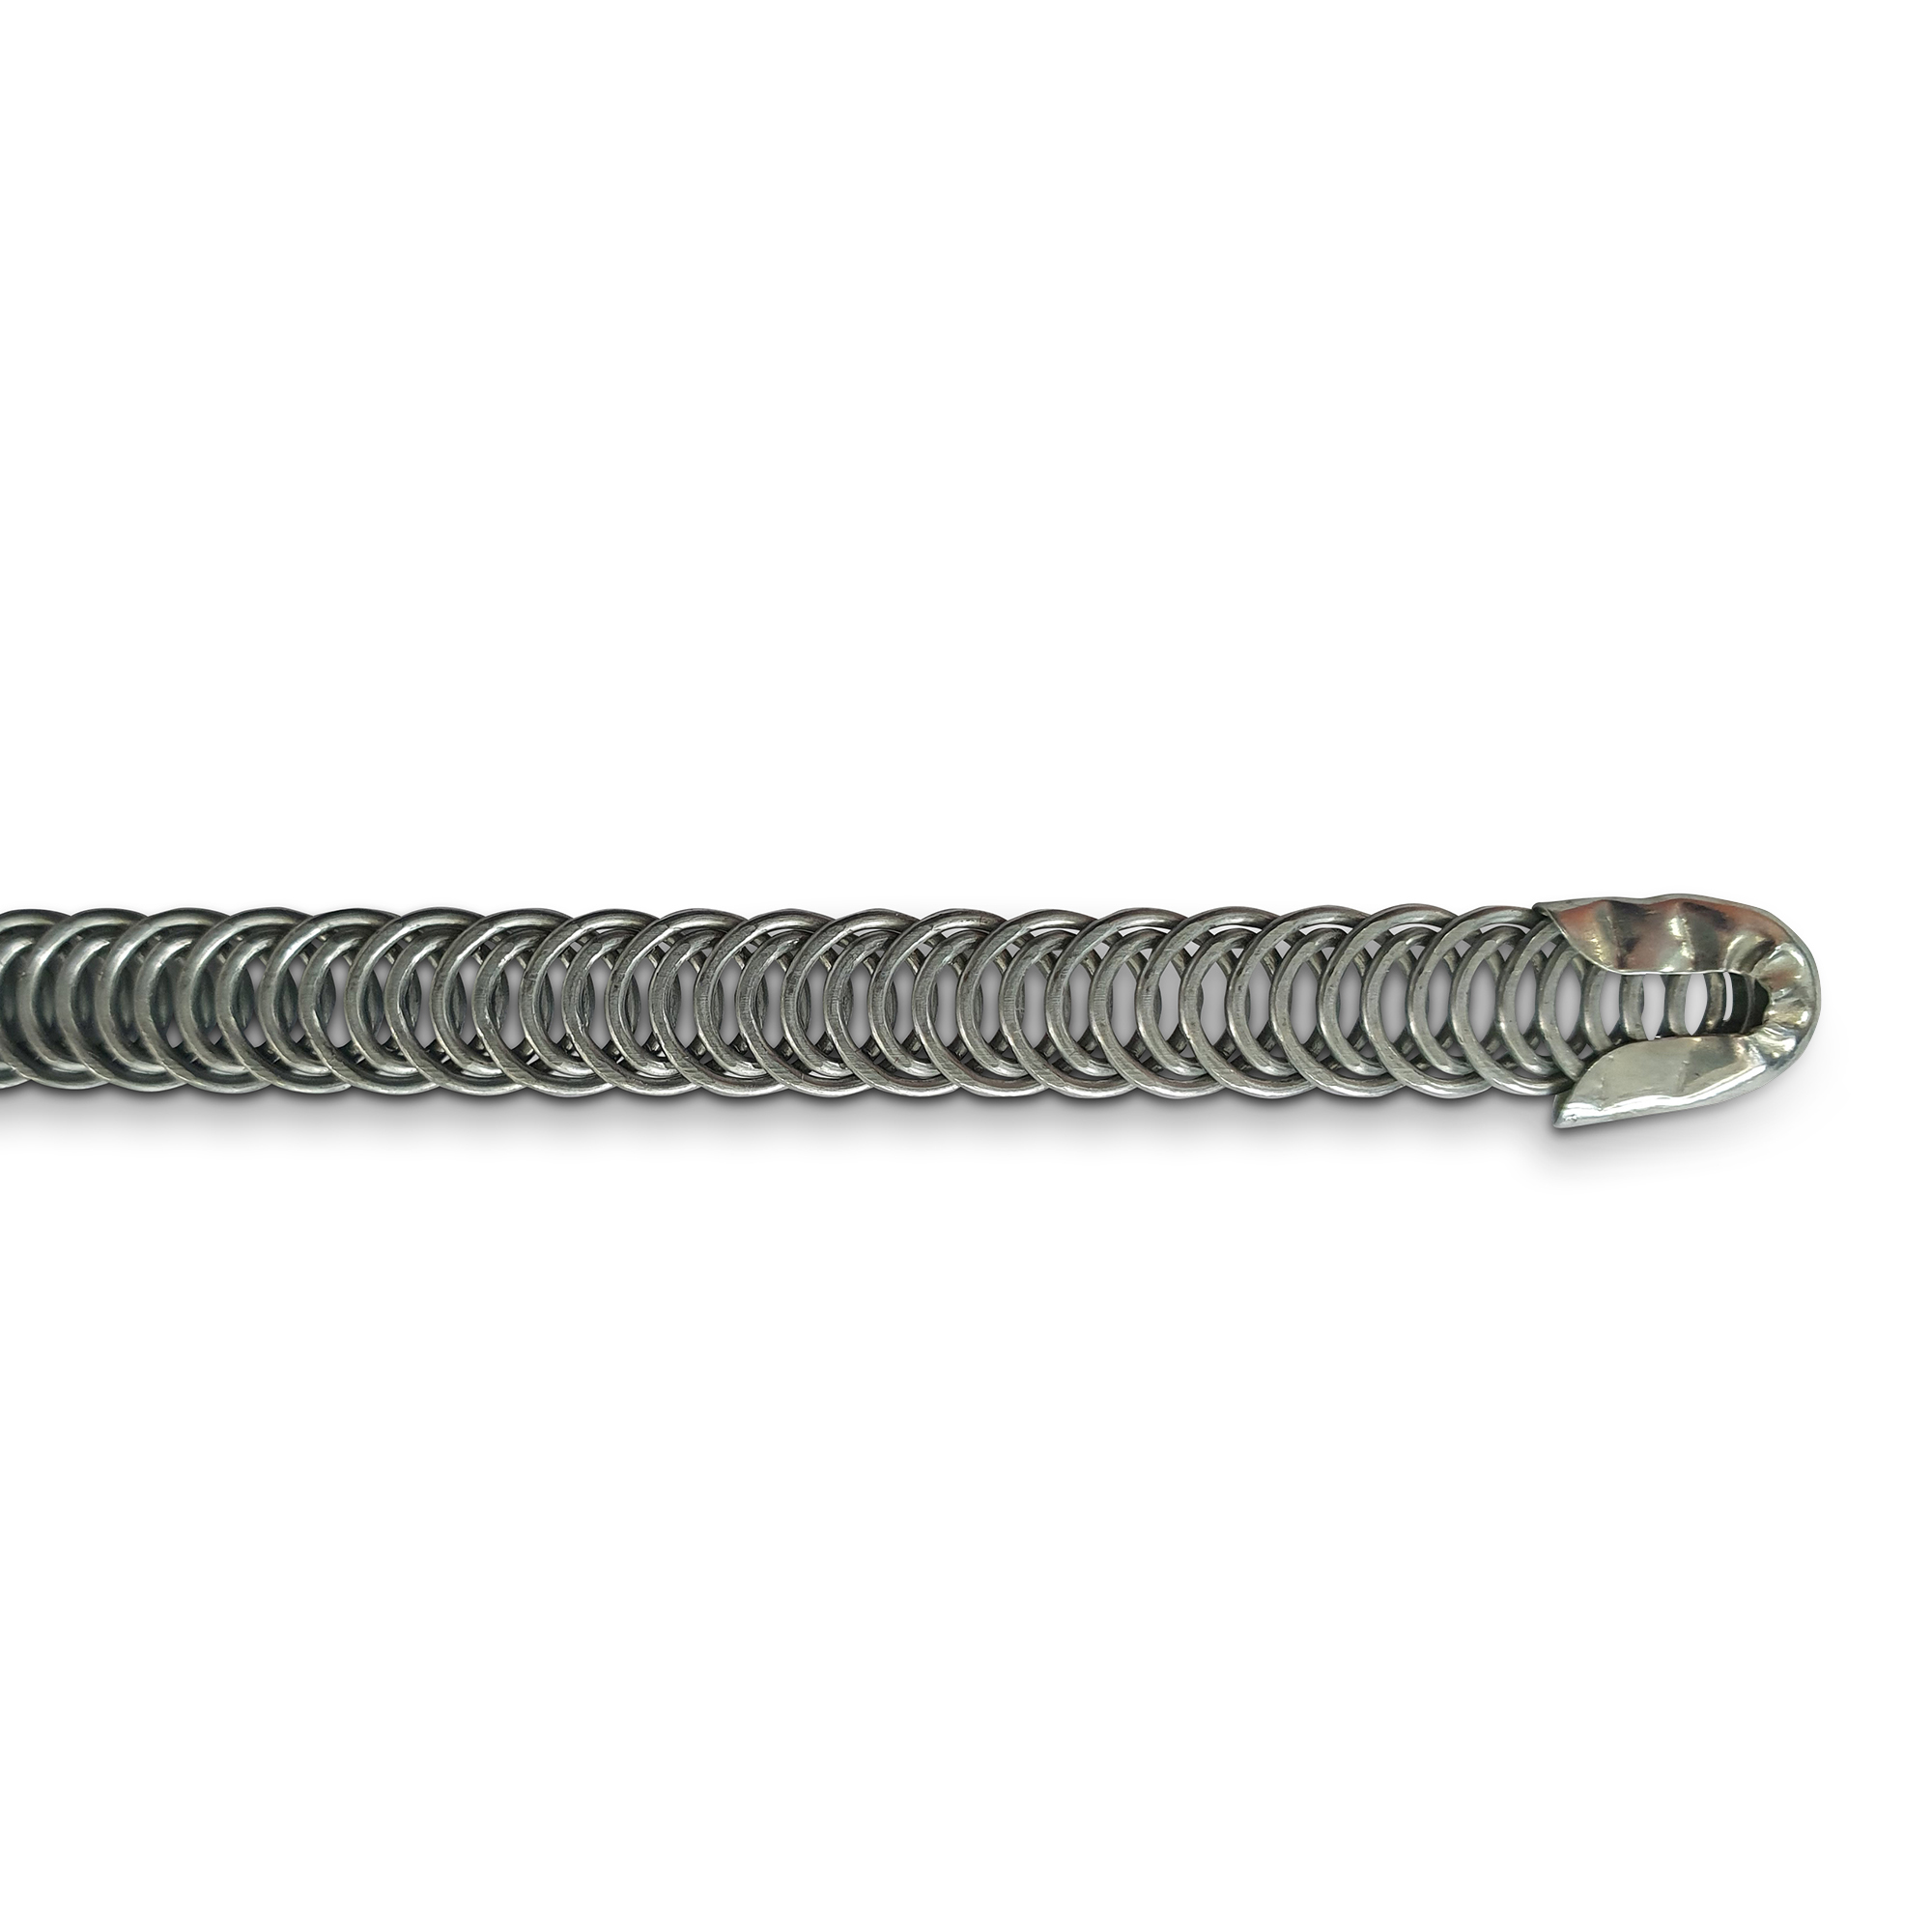 Endless spiral spring metal 7mm, especially flexible for ease of movement